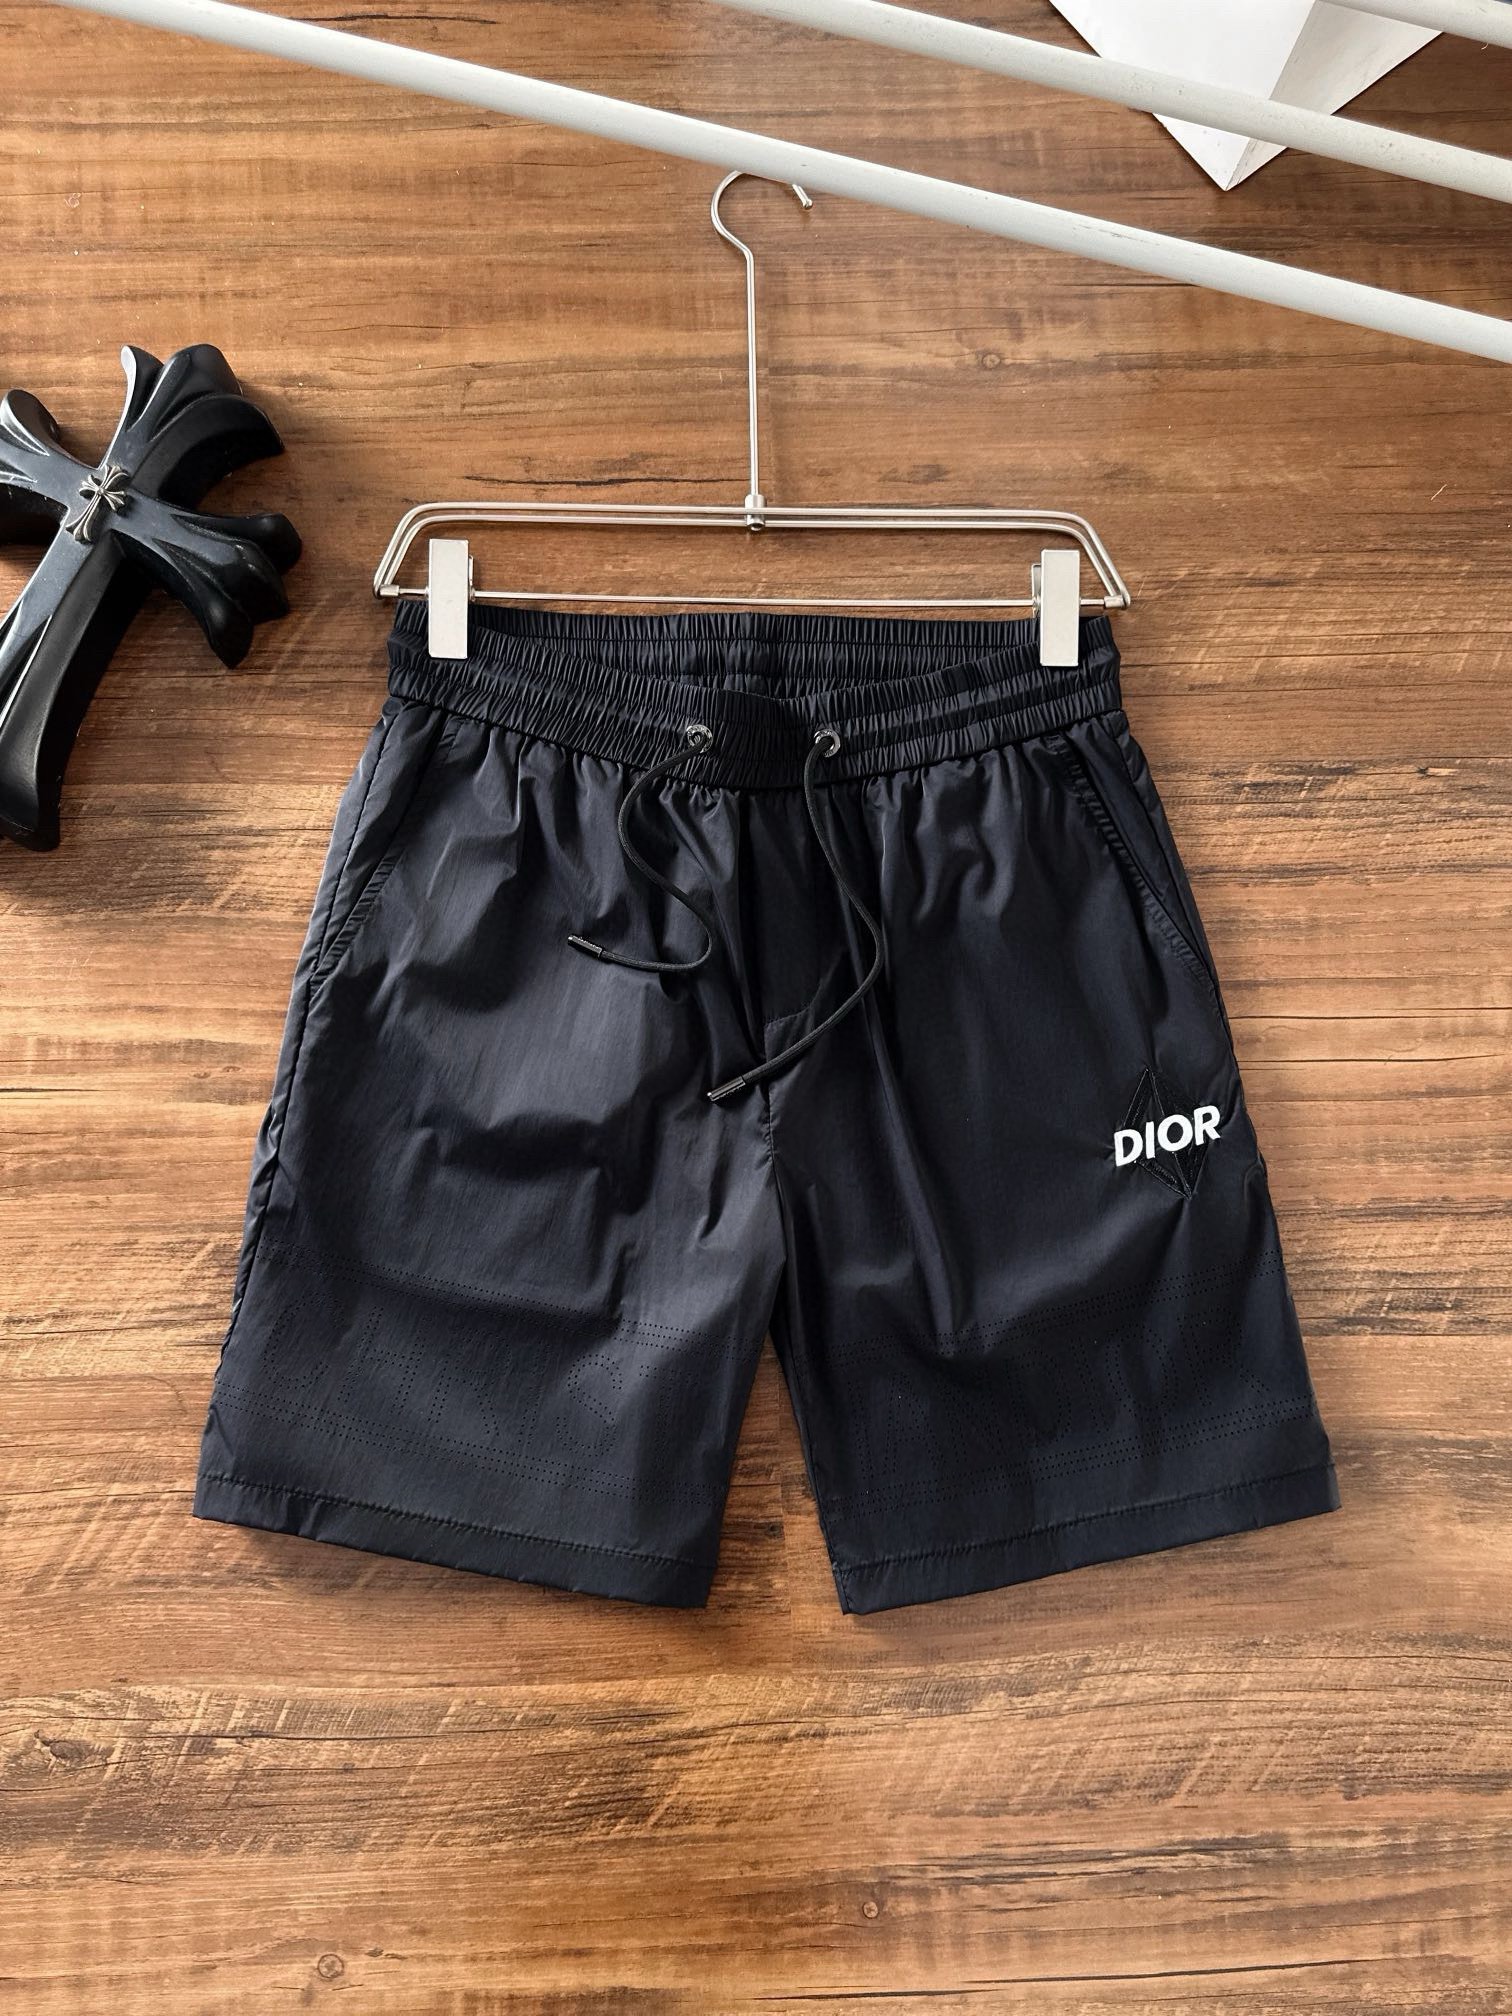 Dior Clothing Pants & Trousers Shorts Spring/Summer Collection Fashion Casual